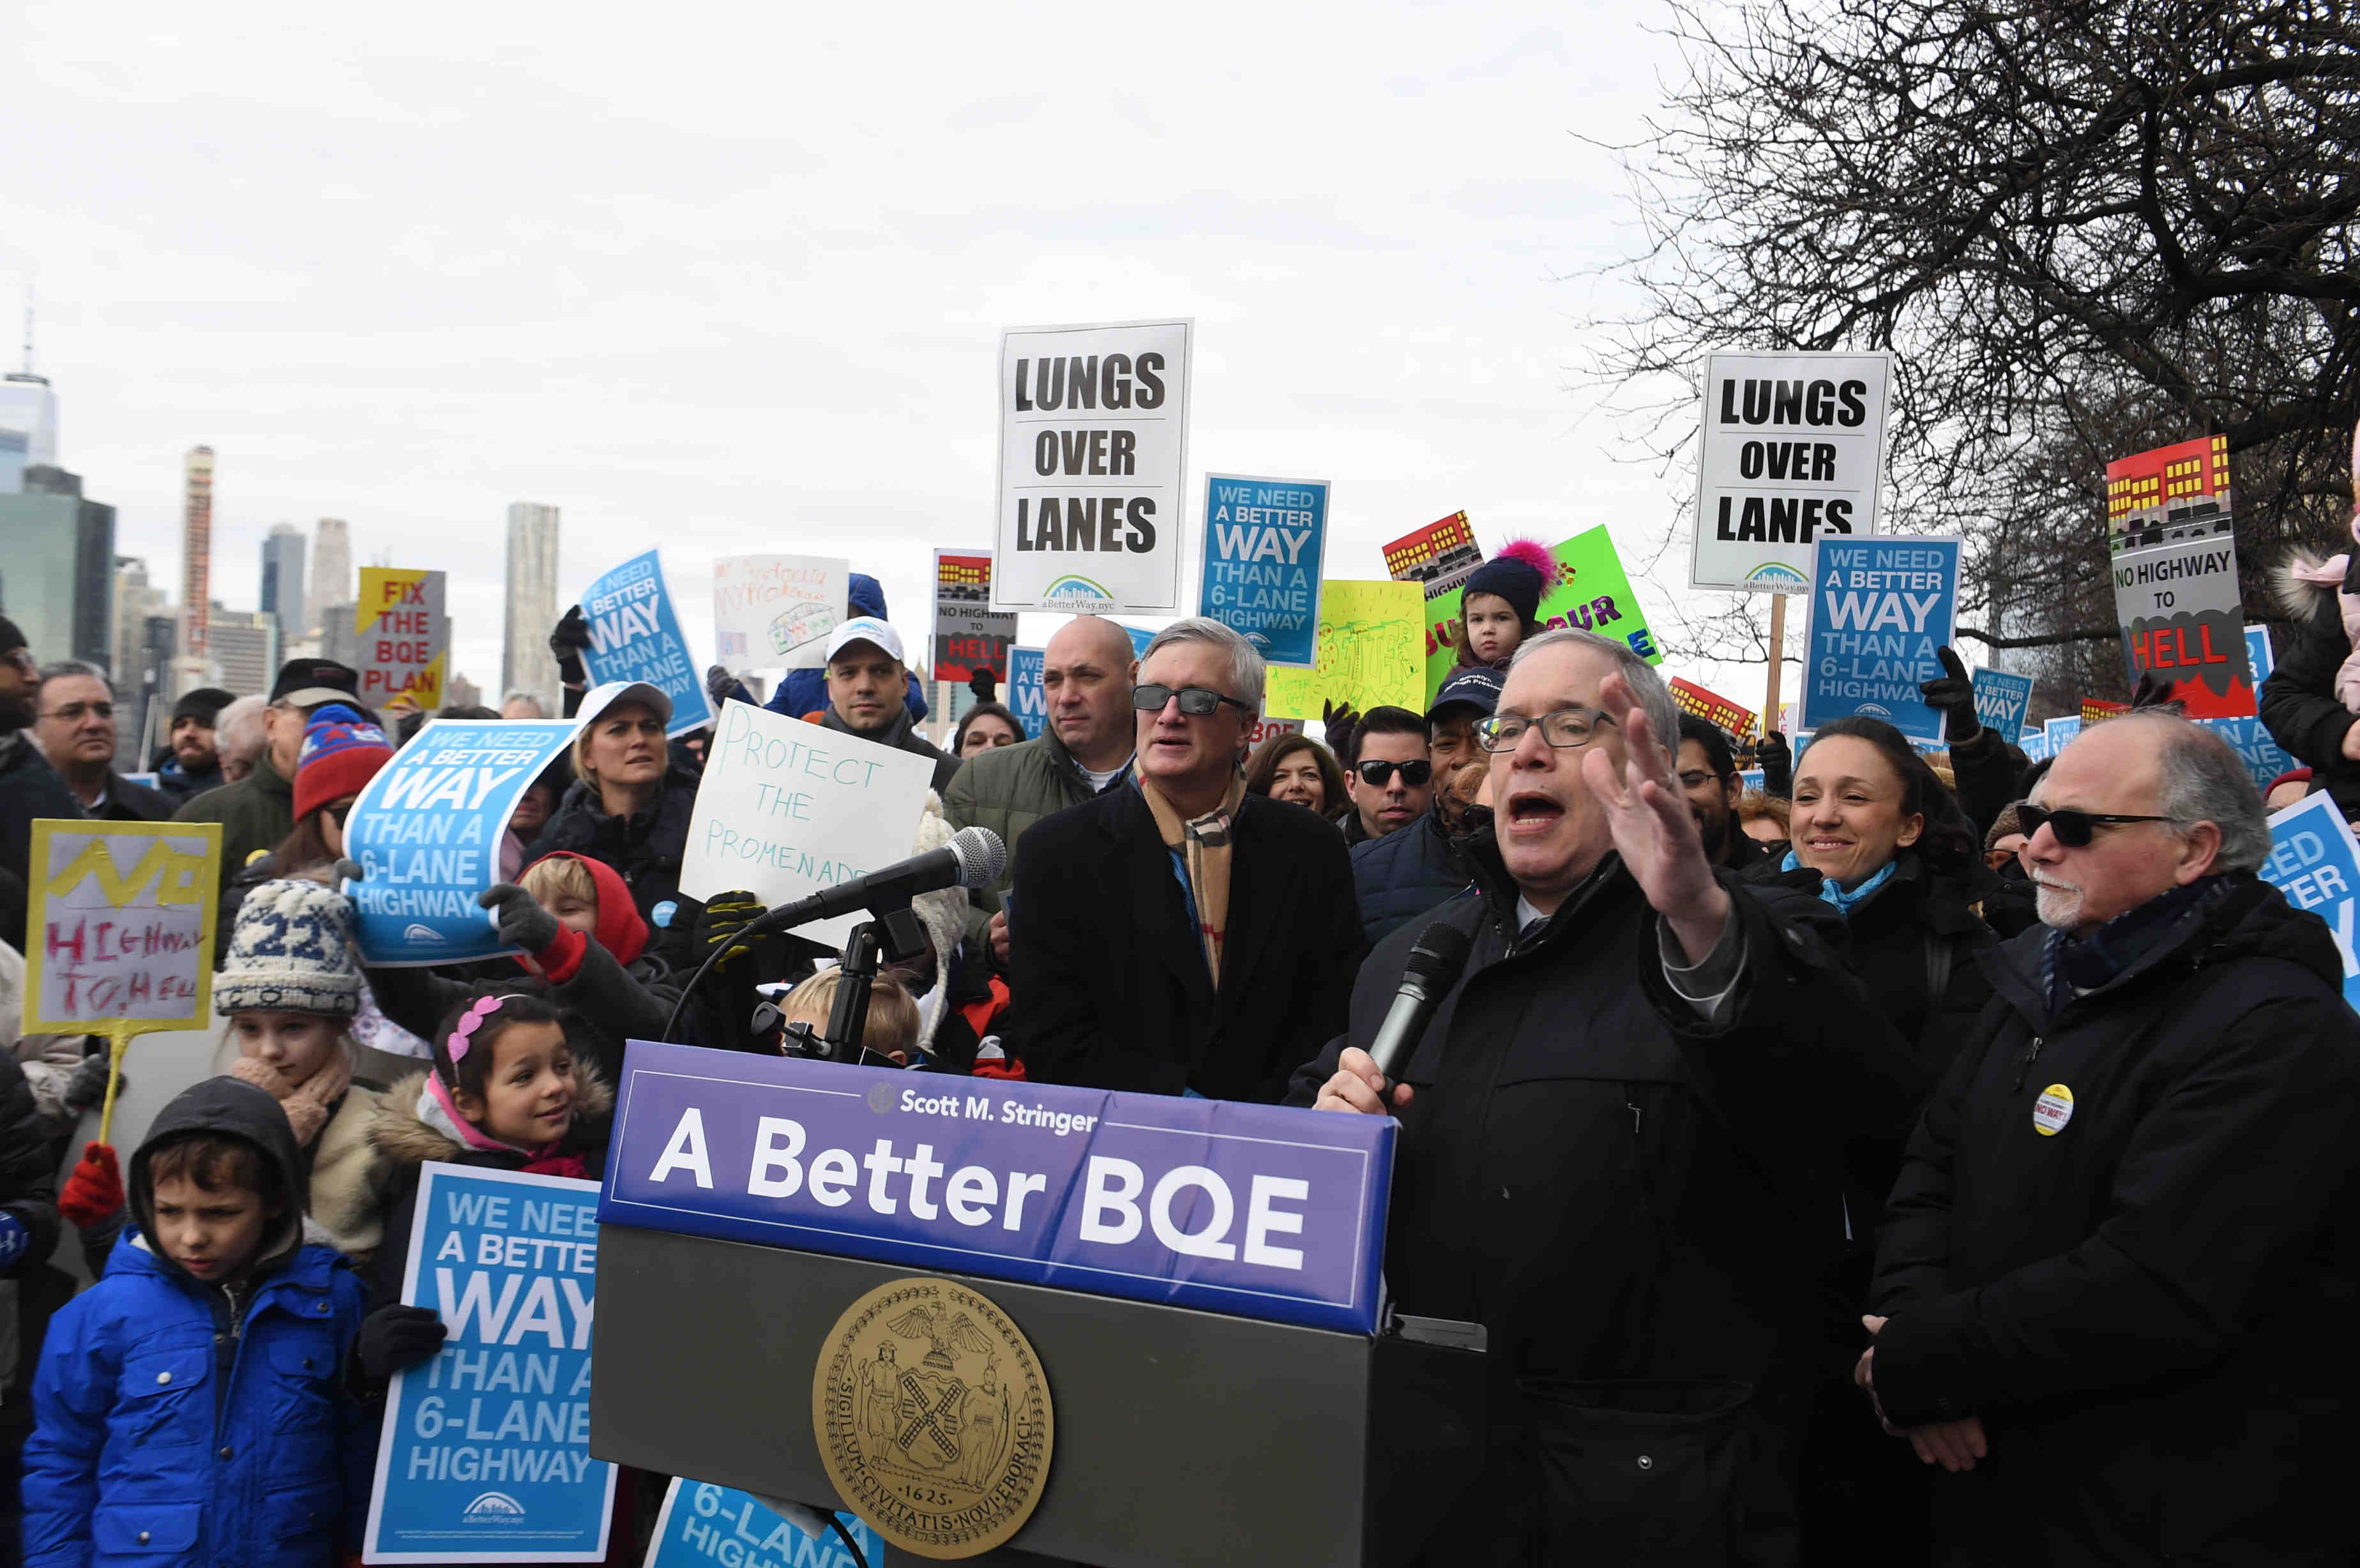 Hundreds of protestors jammed the Brooklyn Heights Promenade for a mass protest against building the BQE on top of the promenade, putting traffic right behind people's homes. Eagle photo by Todd Maisel